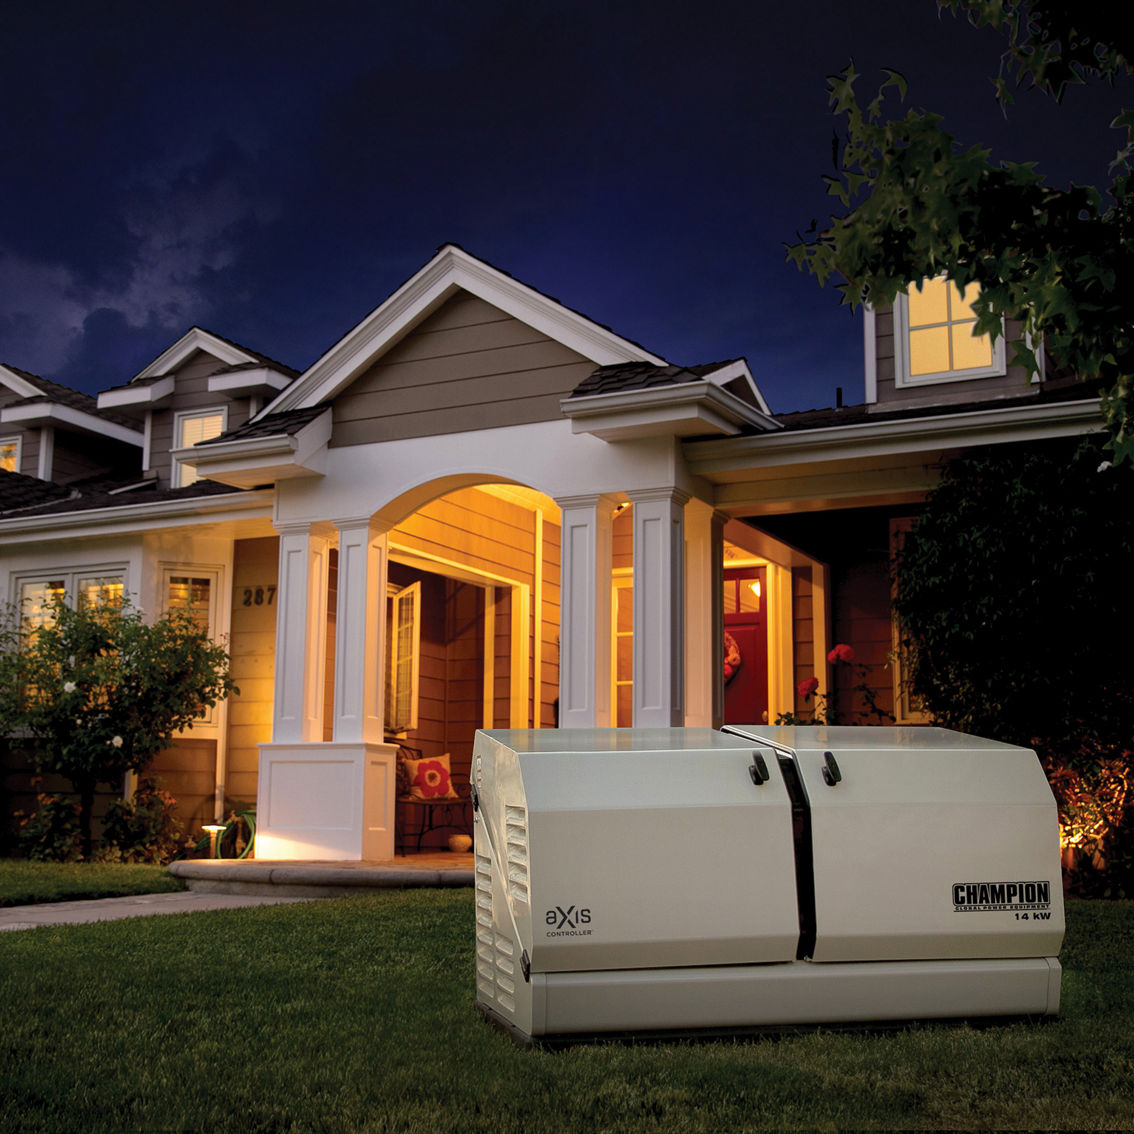 Champion 14kW aXis Home Standby Generator System with 150-Amp Auto Transfer Switch - Image 5 of 8